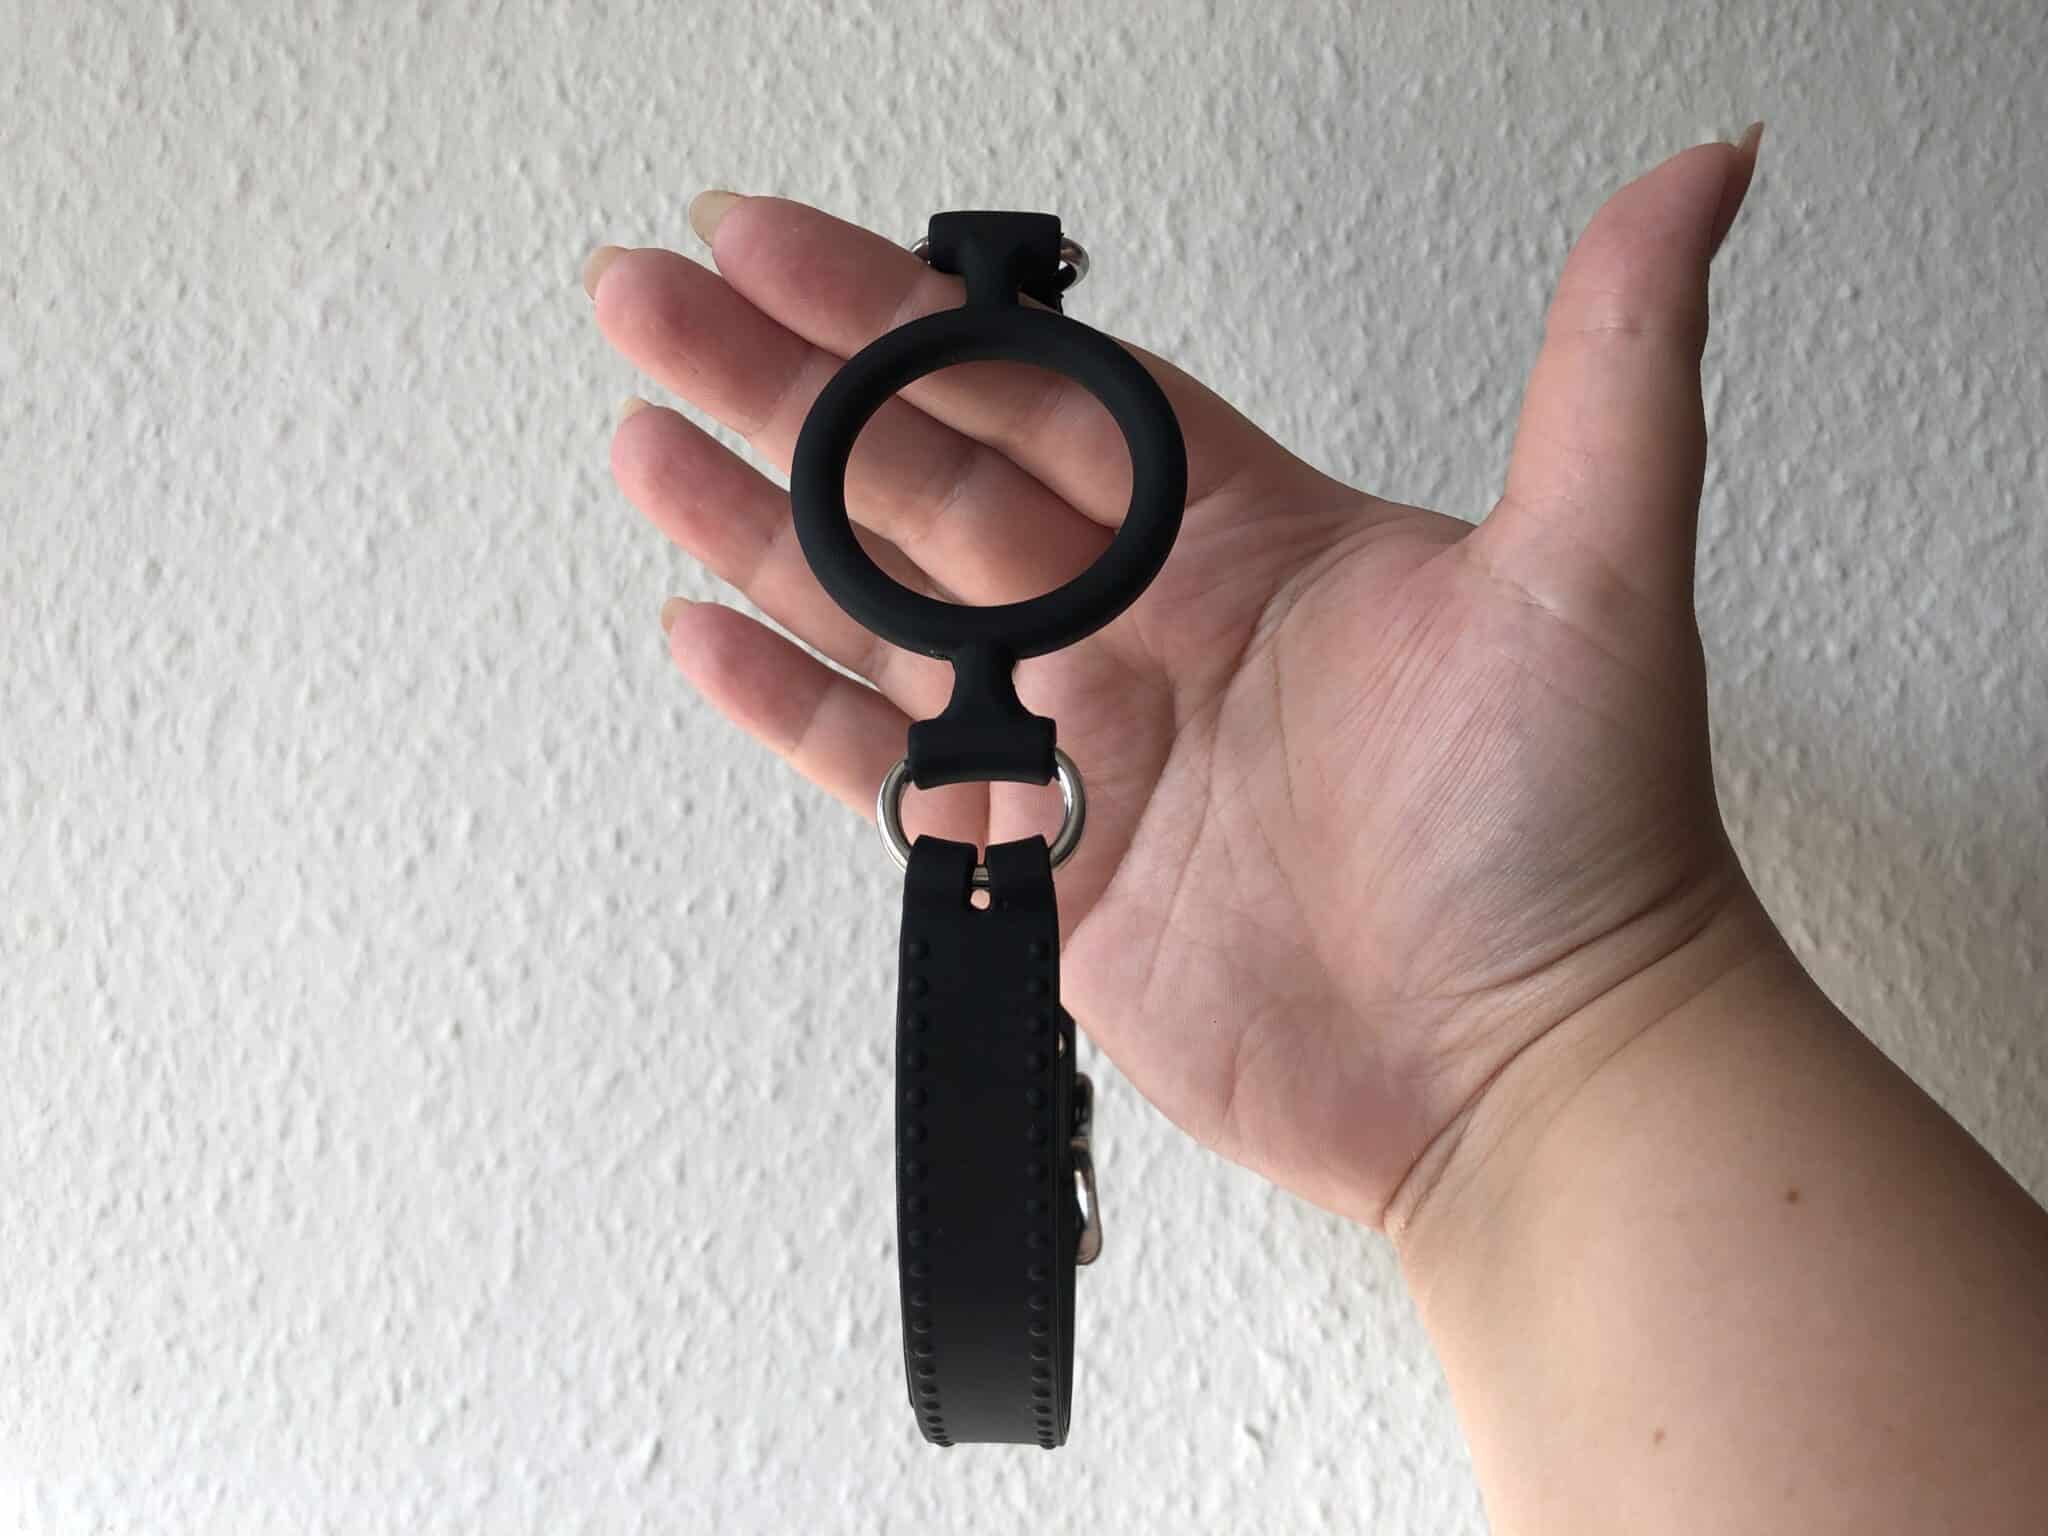 My Personal Experiences with Fetish Fantasy Extreme O-Ring Gag